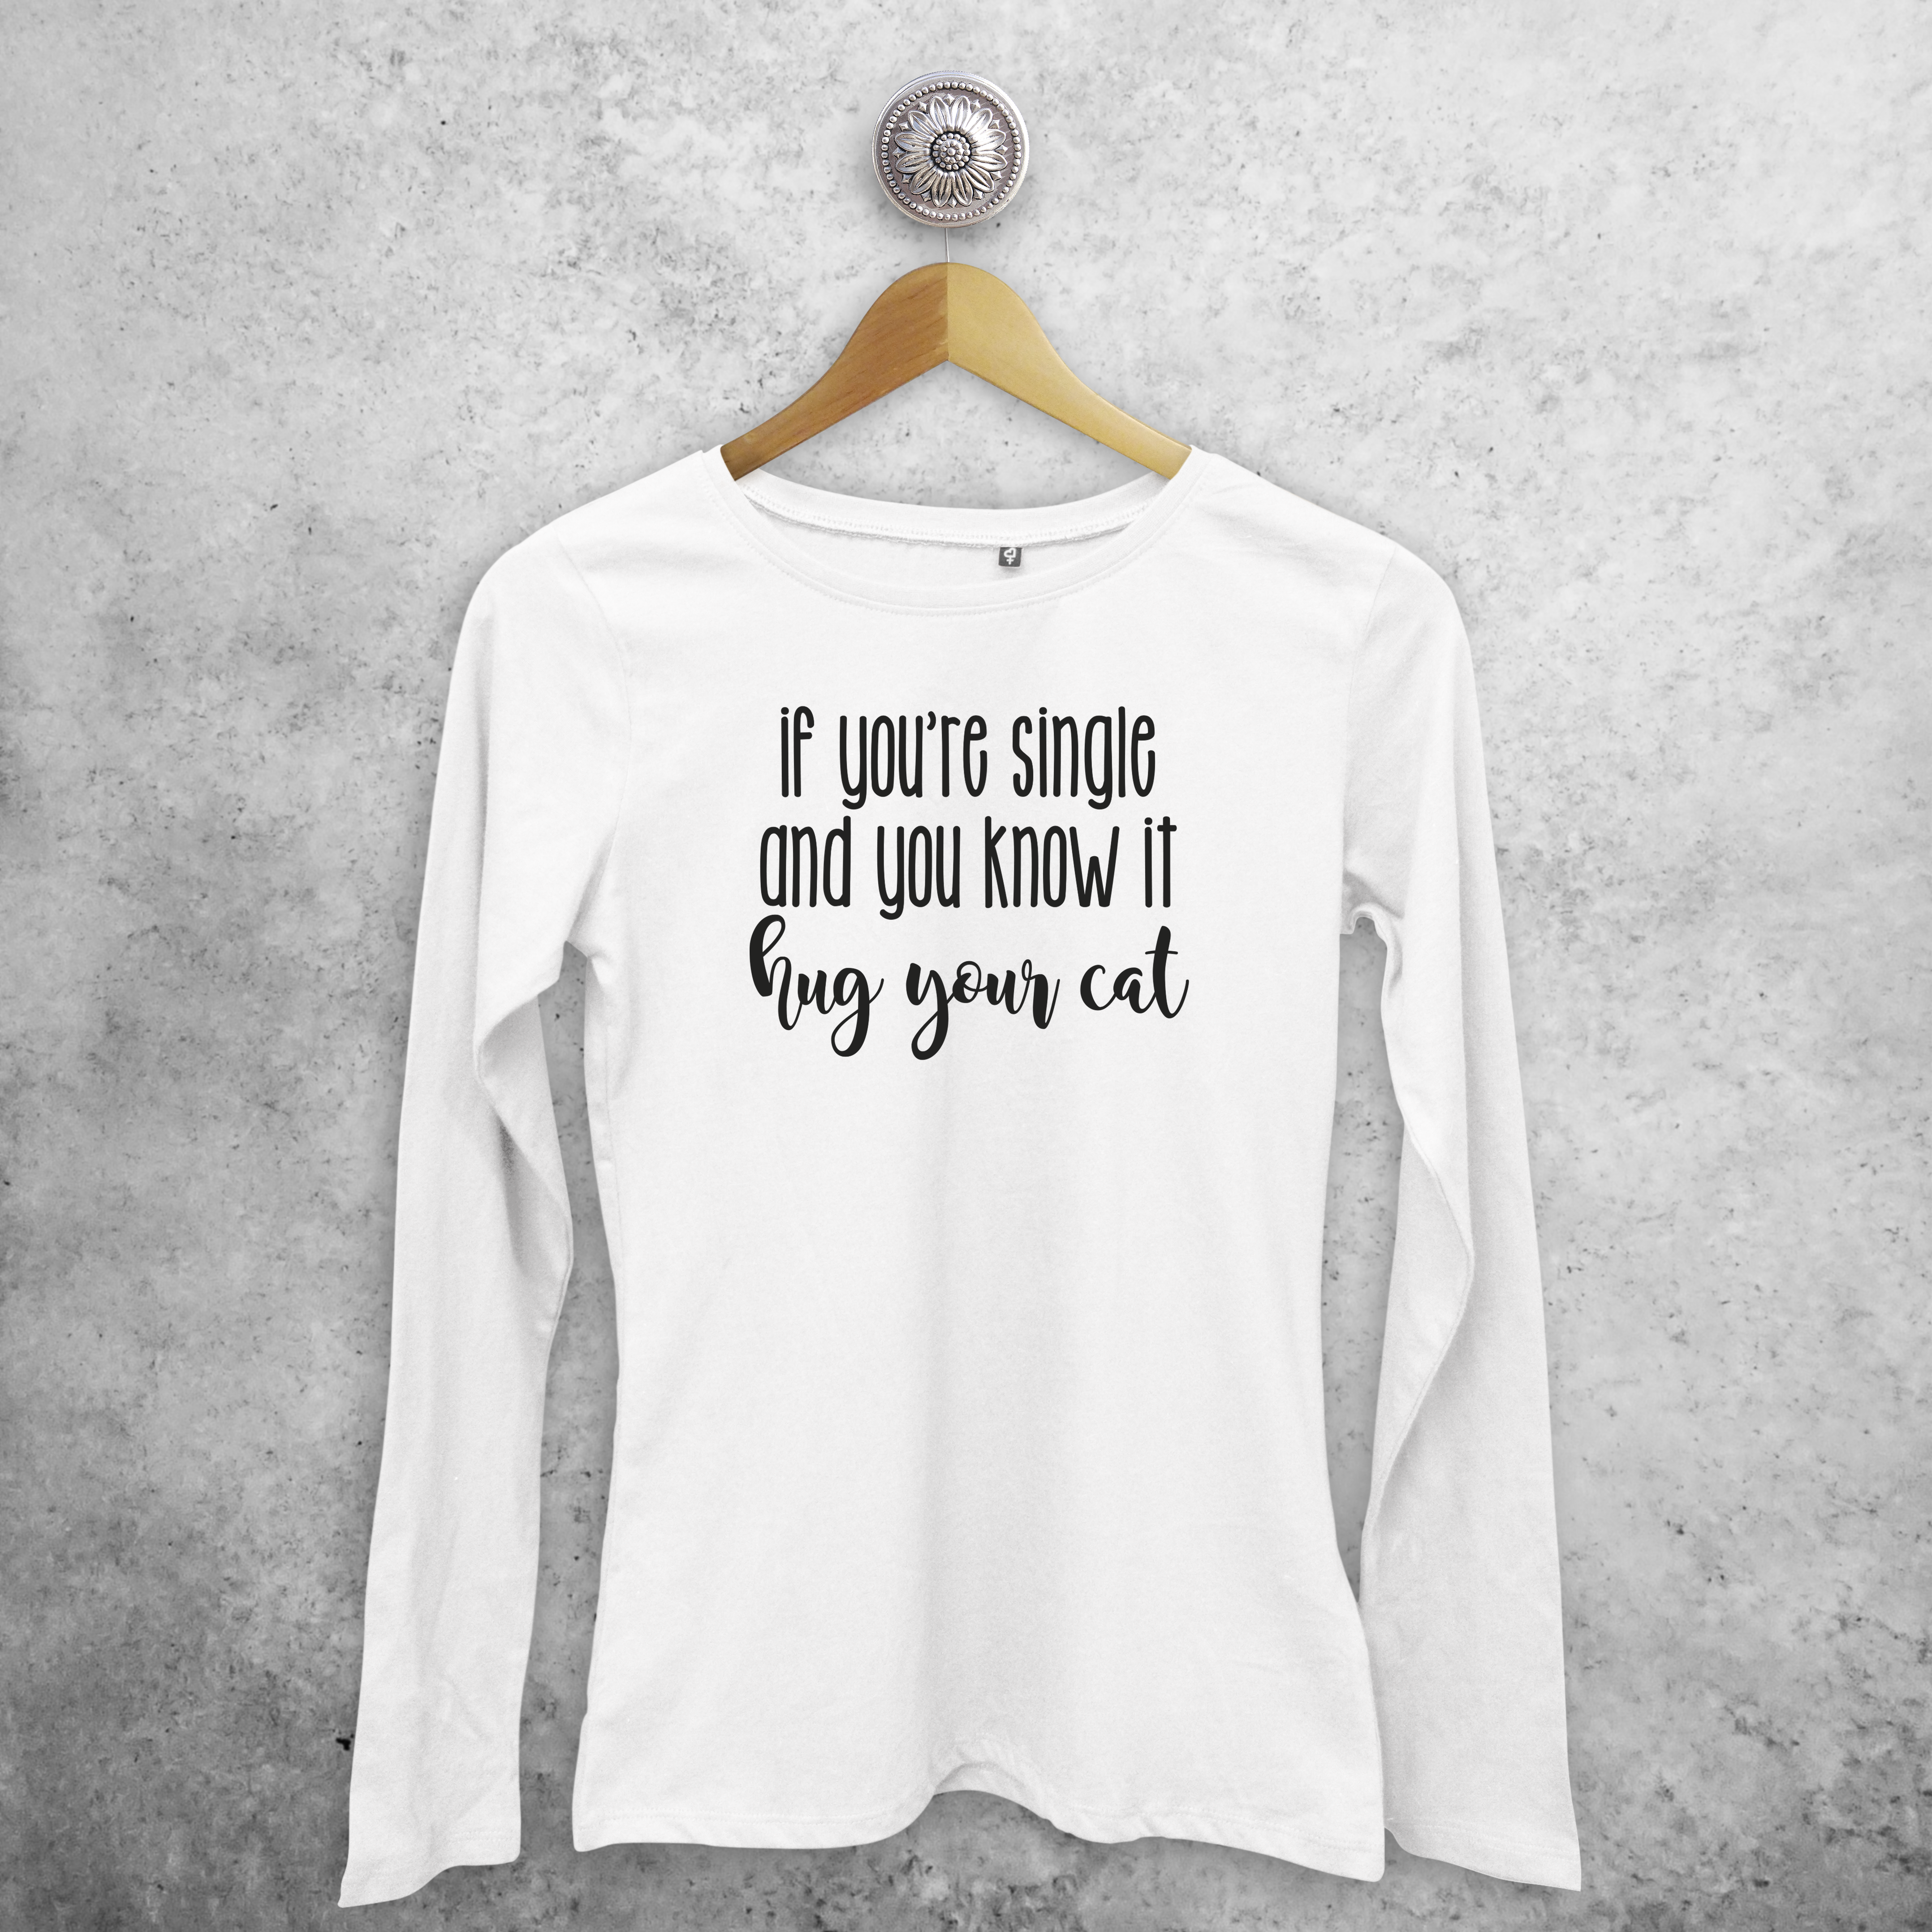 'If you're single and you know it, hug your cat' adult longsleeve shirt